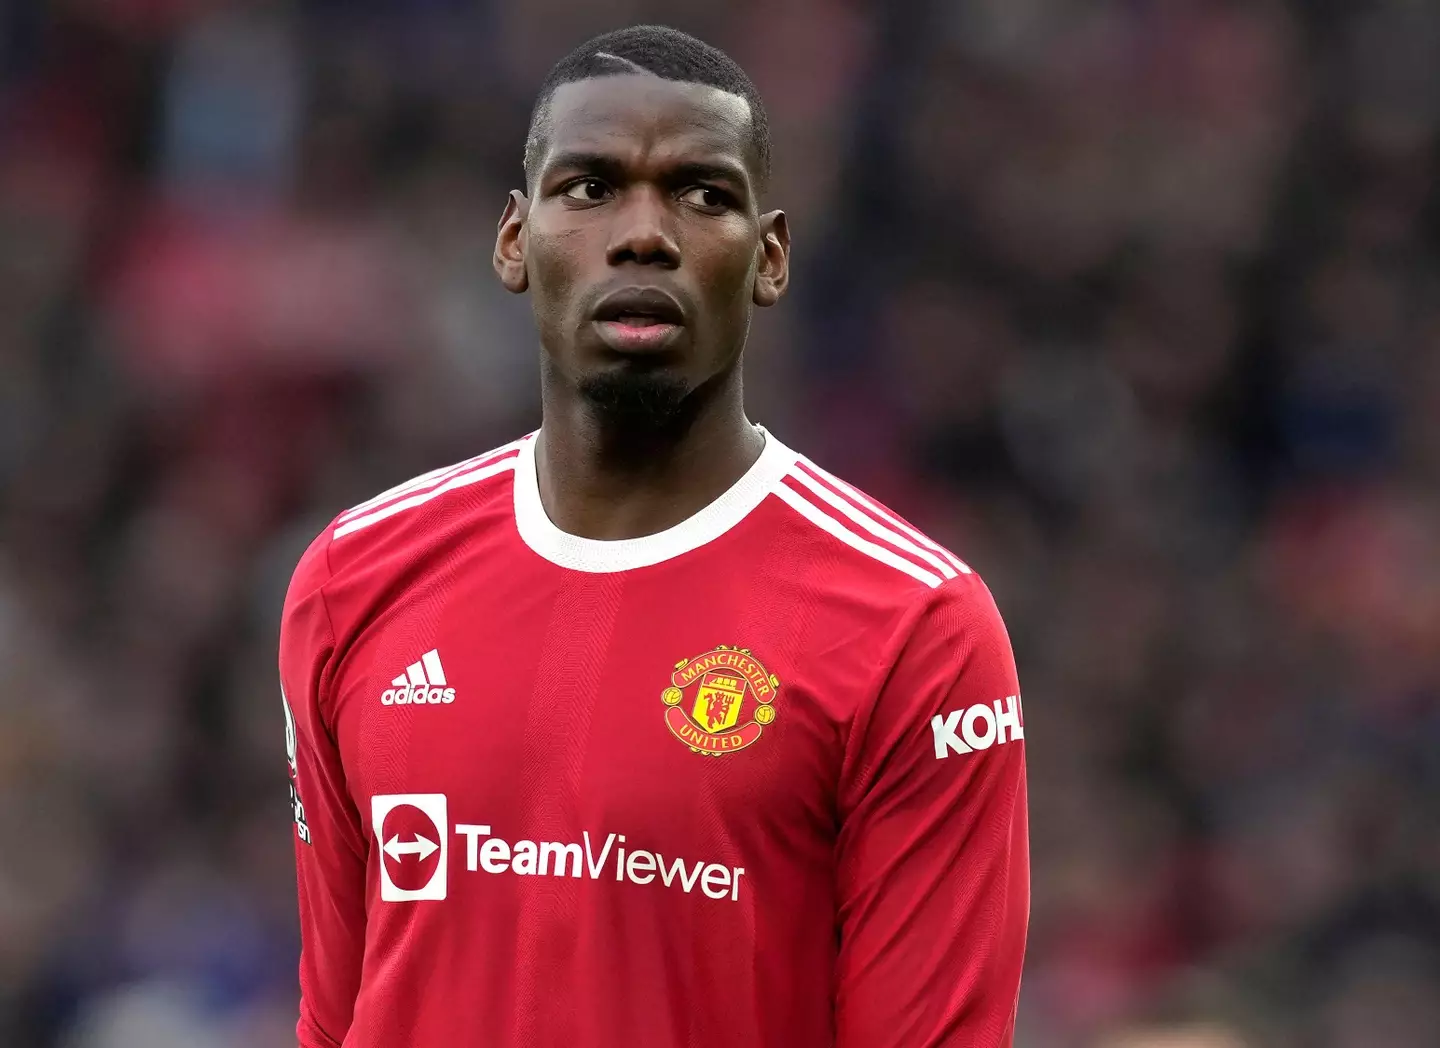 Pogba recently returned from a groin injury (Image: PA)